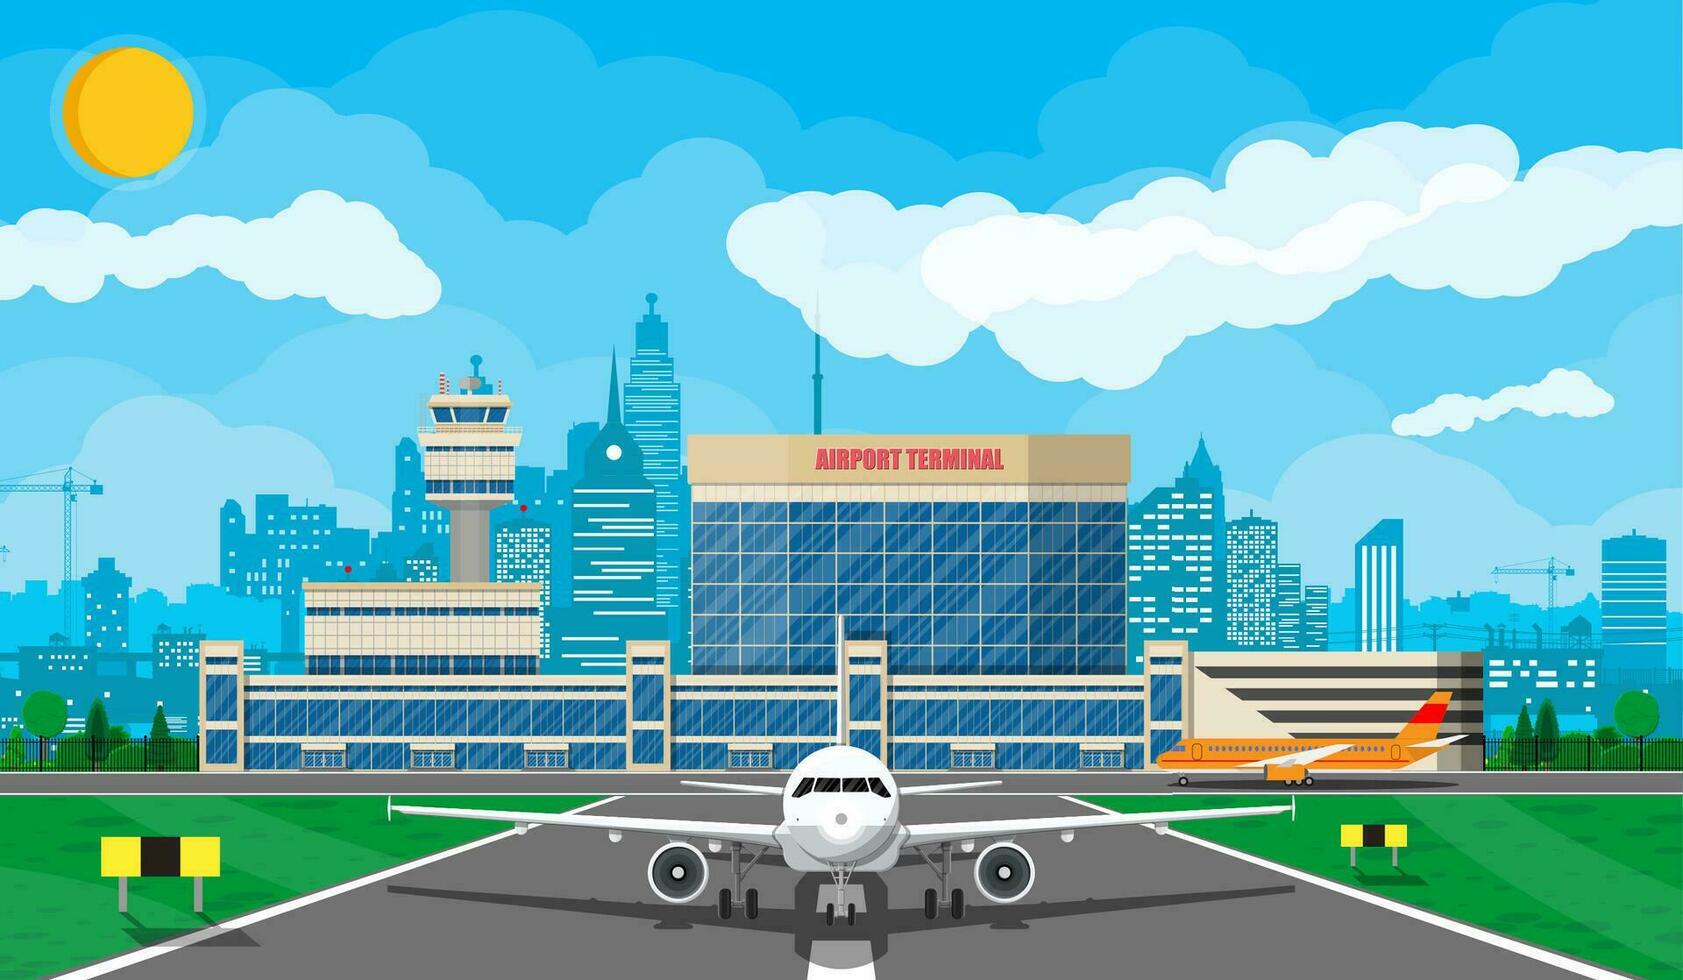 Plane before takeoff. Airport control tower, terminal building and parking area. Cityscape. Sky with clouds and sun. Vector illustration in flat style